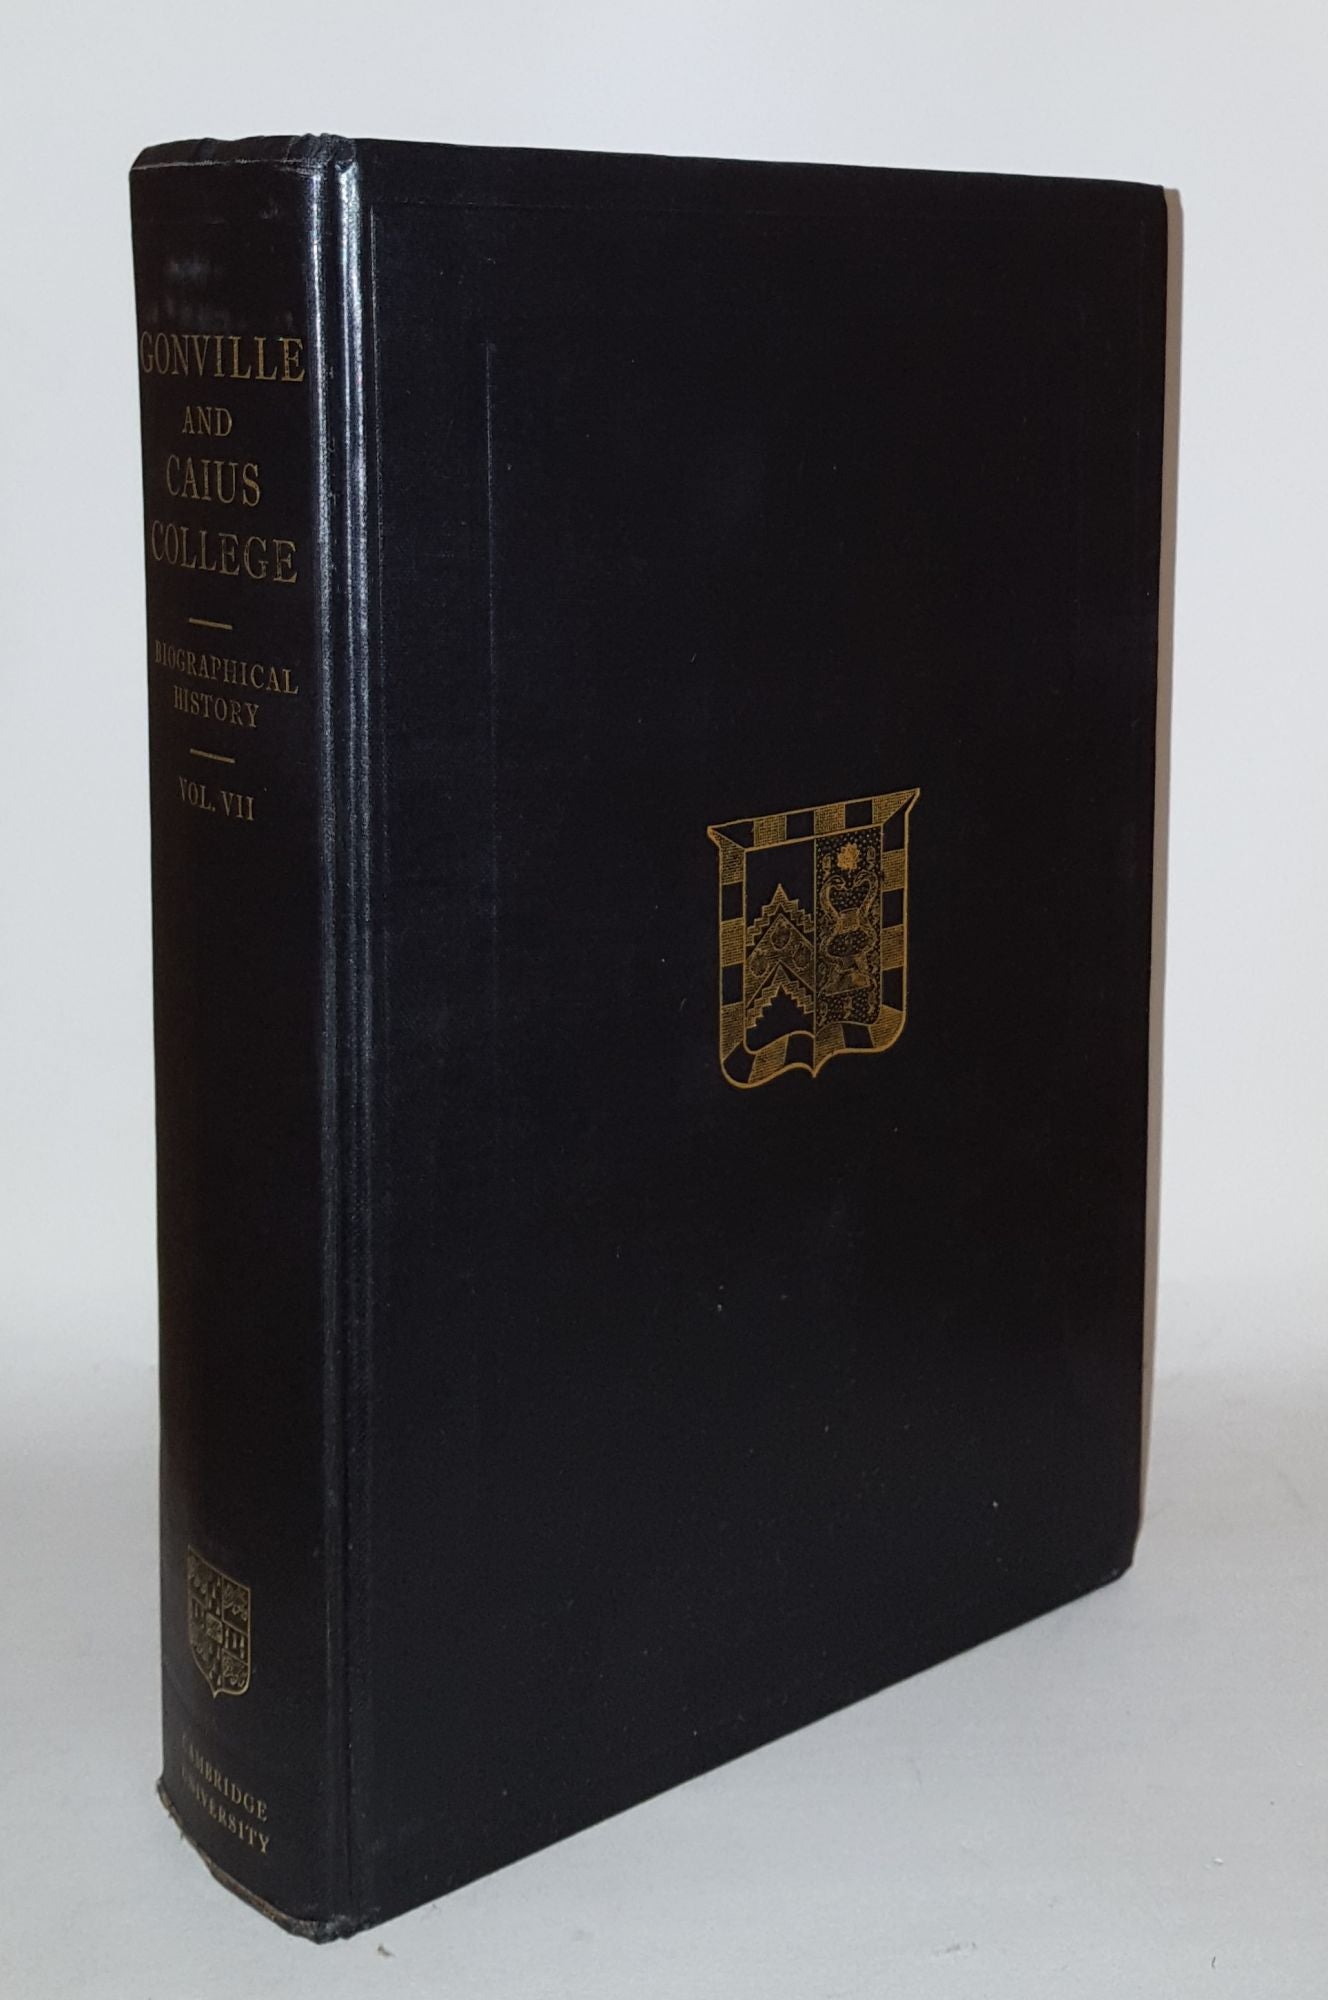 PRICHARD M.J., SKEMP J.B. - Biographical History of Gonville and Caius College Volume VII